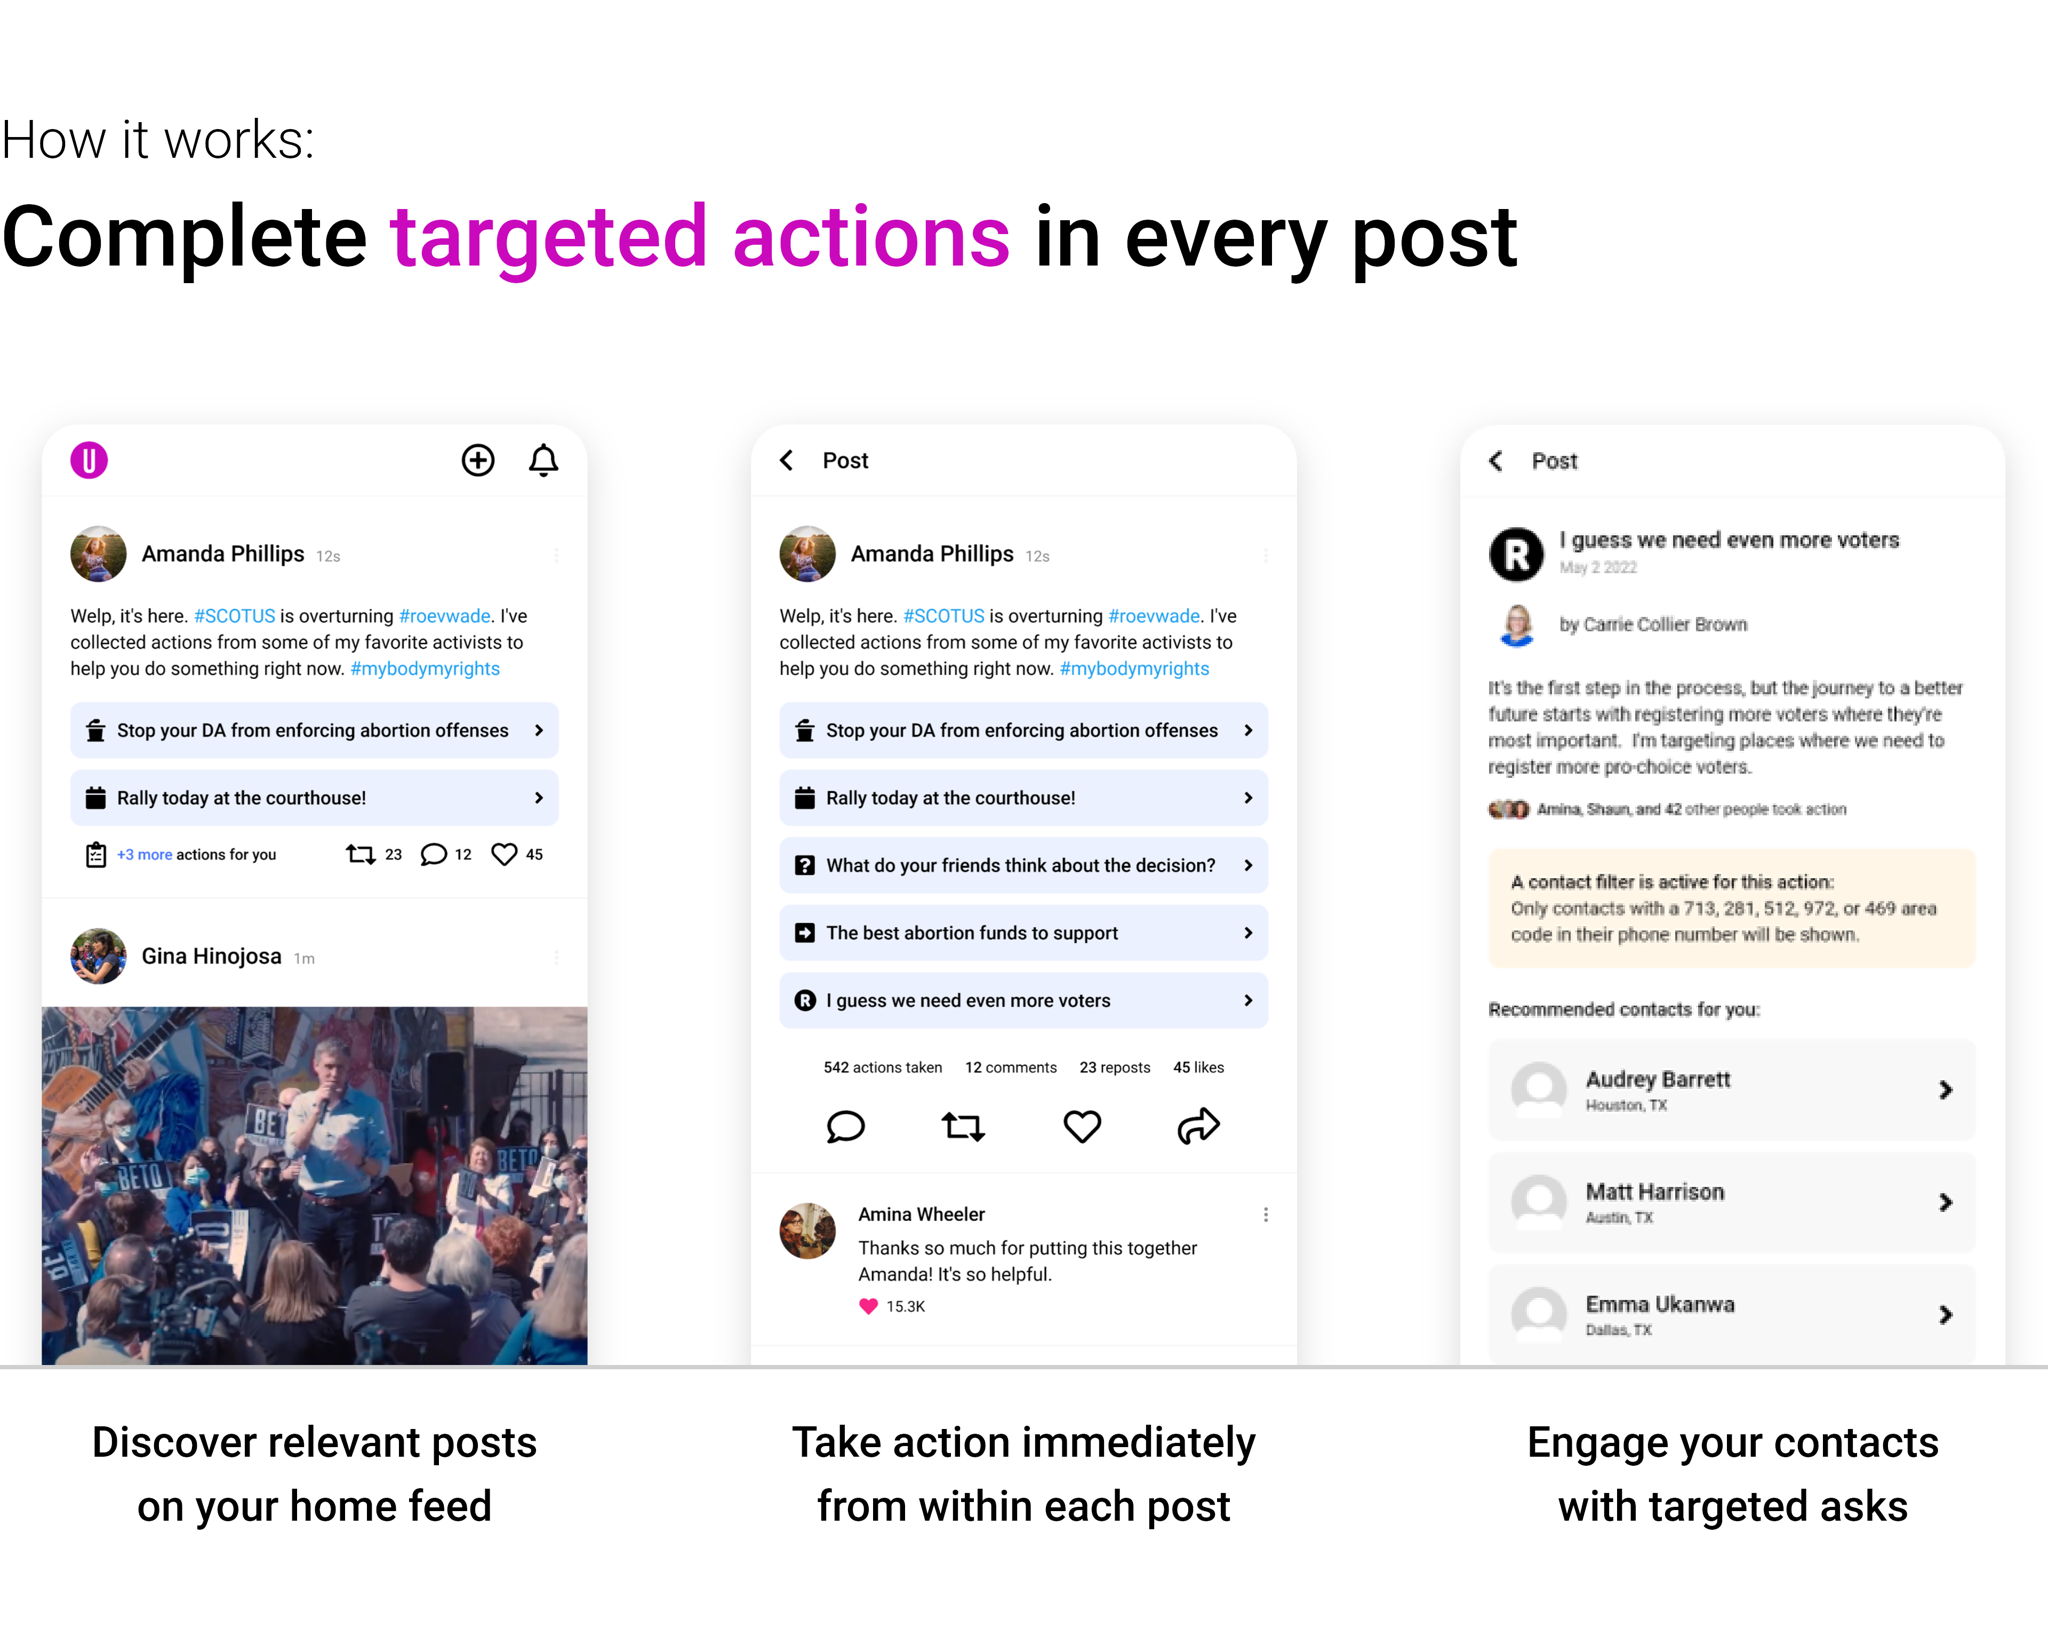 How it works: Complete targeted actions in every post. Discover relevant posts on your home feed.  Take action immediately from within each post.  Engage your contacts with targeted asks.